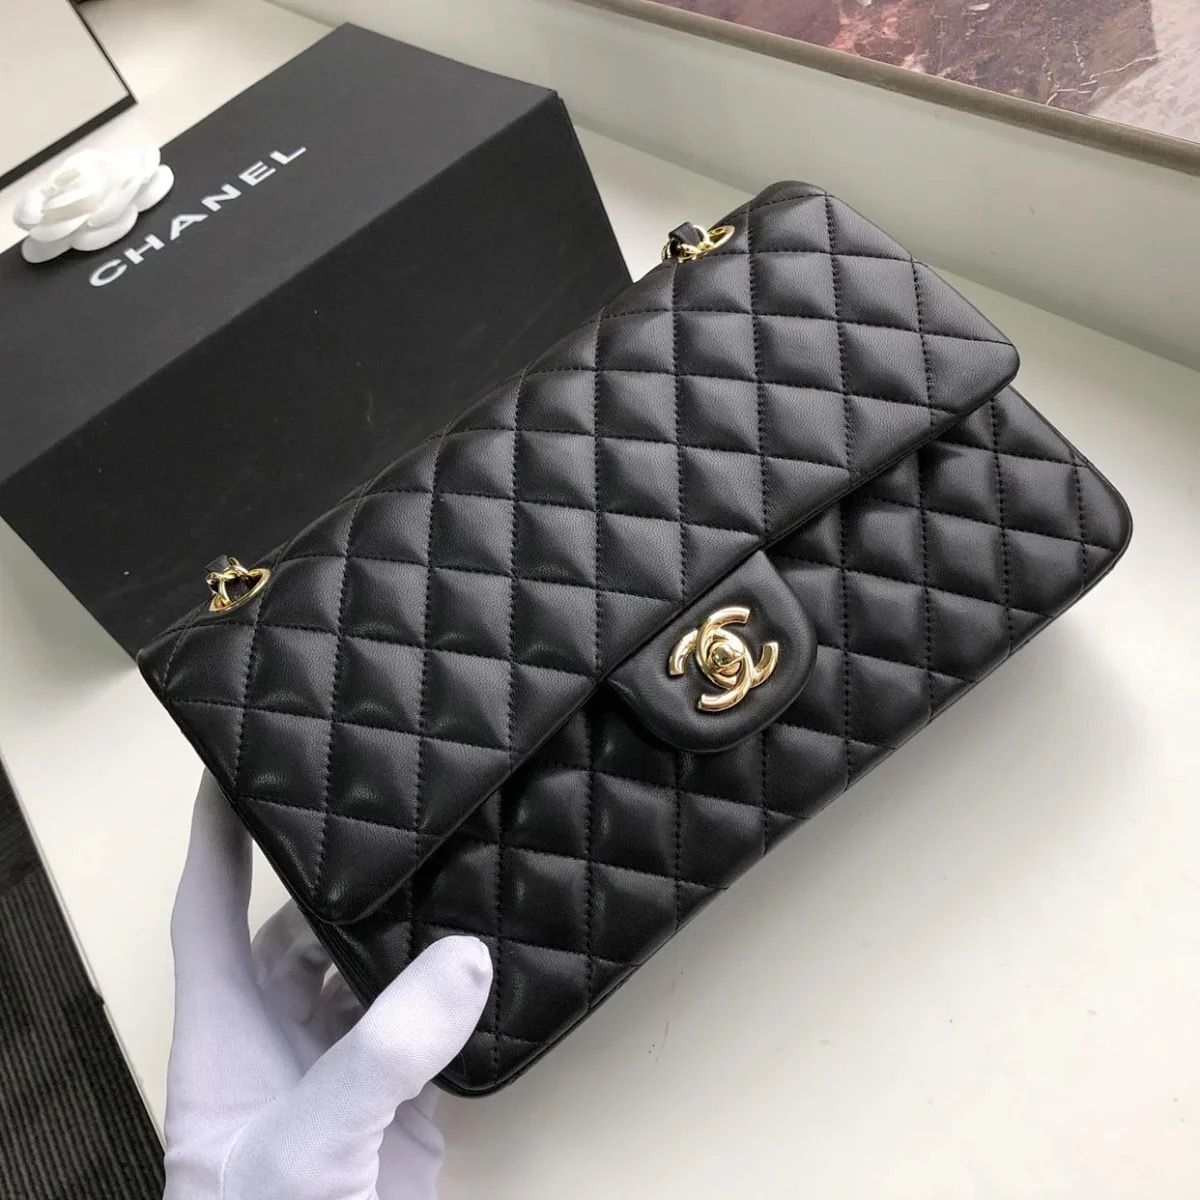 Chanel bag by Dhgate, does it look like a 1:1? : r/RepladiesDesigner